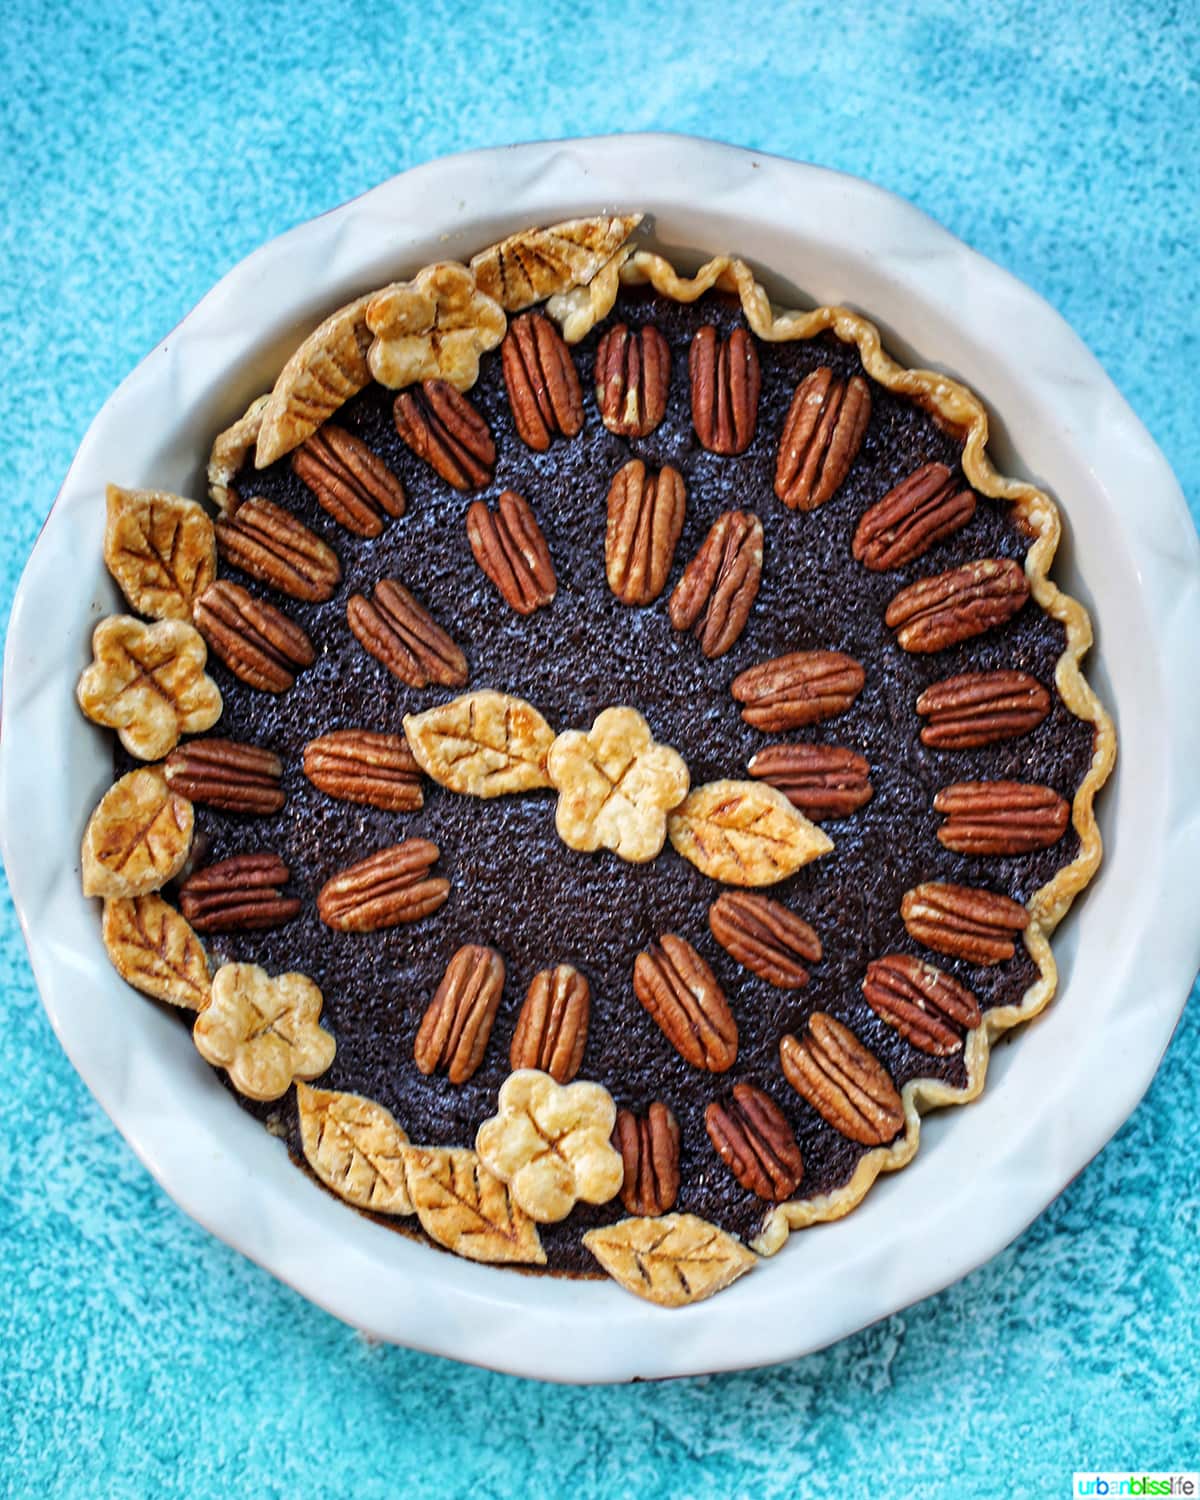 Chocolate Bourbon Pecan Pie with pie crust cutouts in leaf and flower shapes with pecan halves as pie decoration in a white pie pan on blue table.